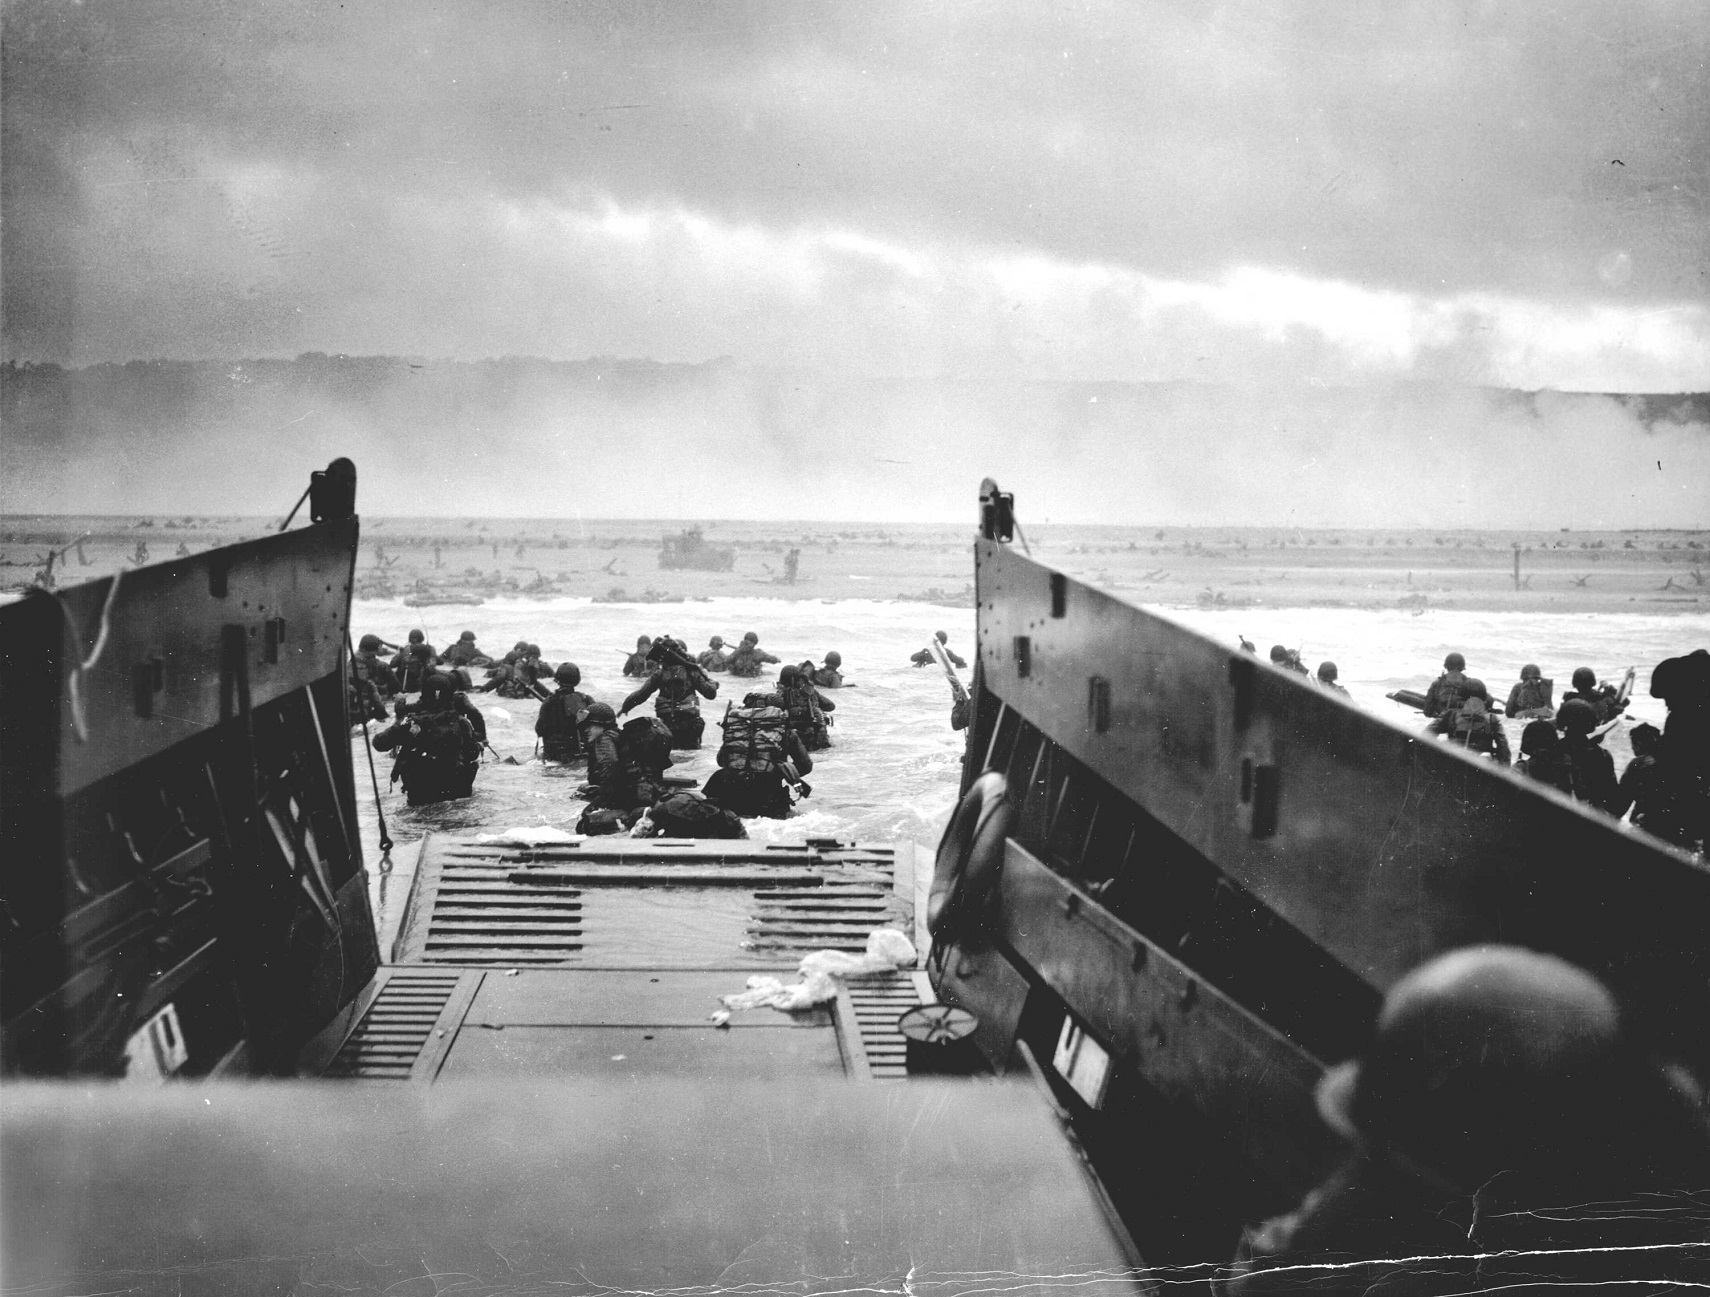 The D-Day landing at Normandy on June 6, 1944. Photo: Robert Sargent